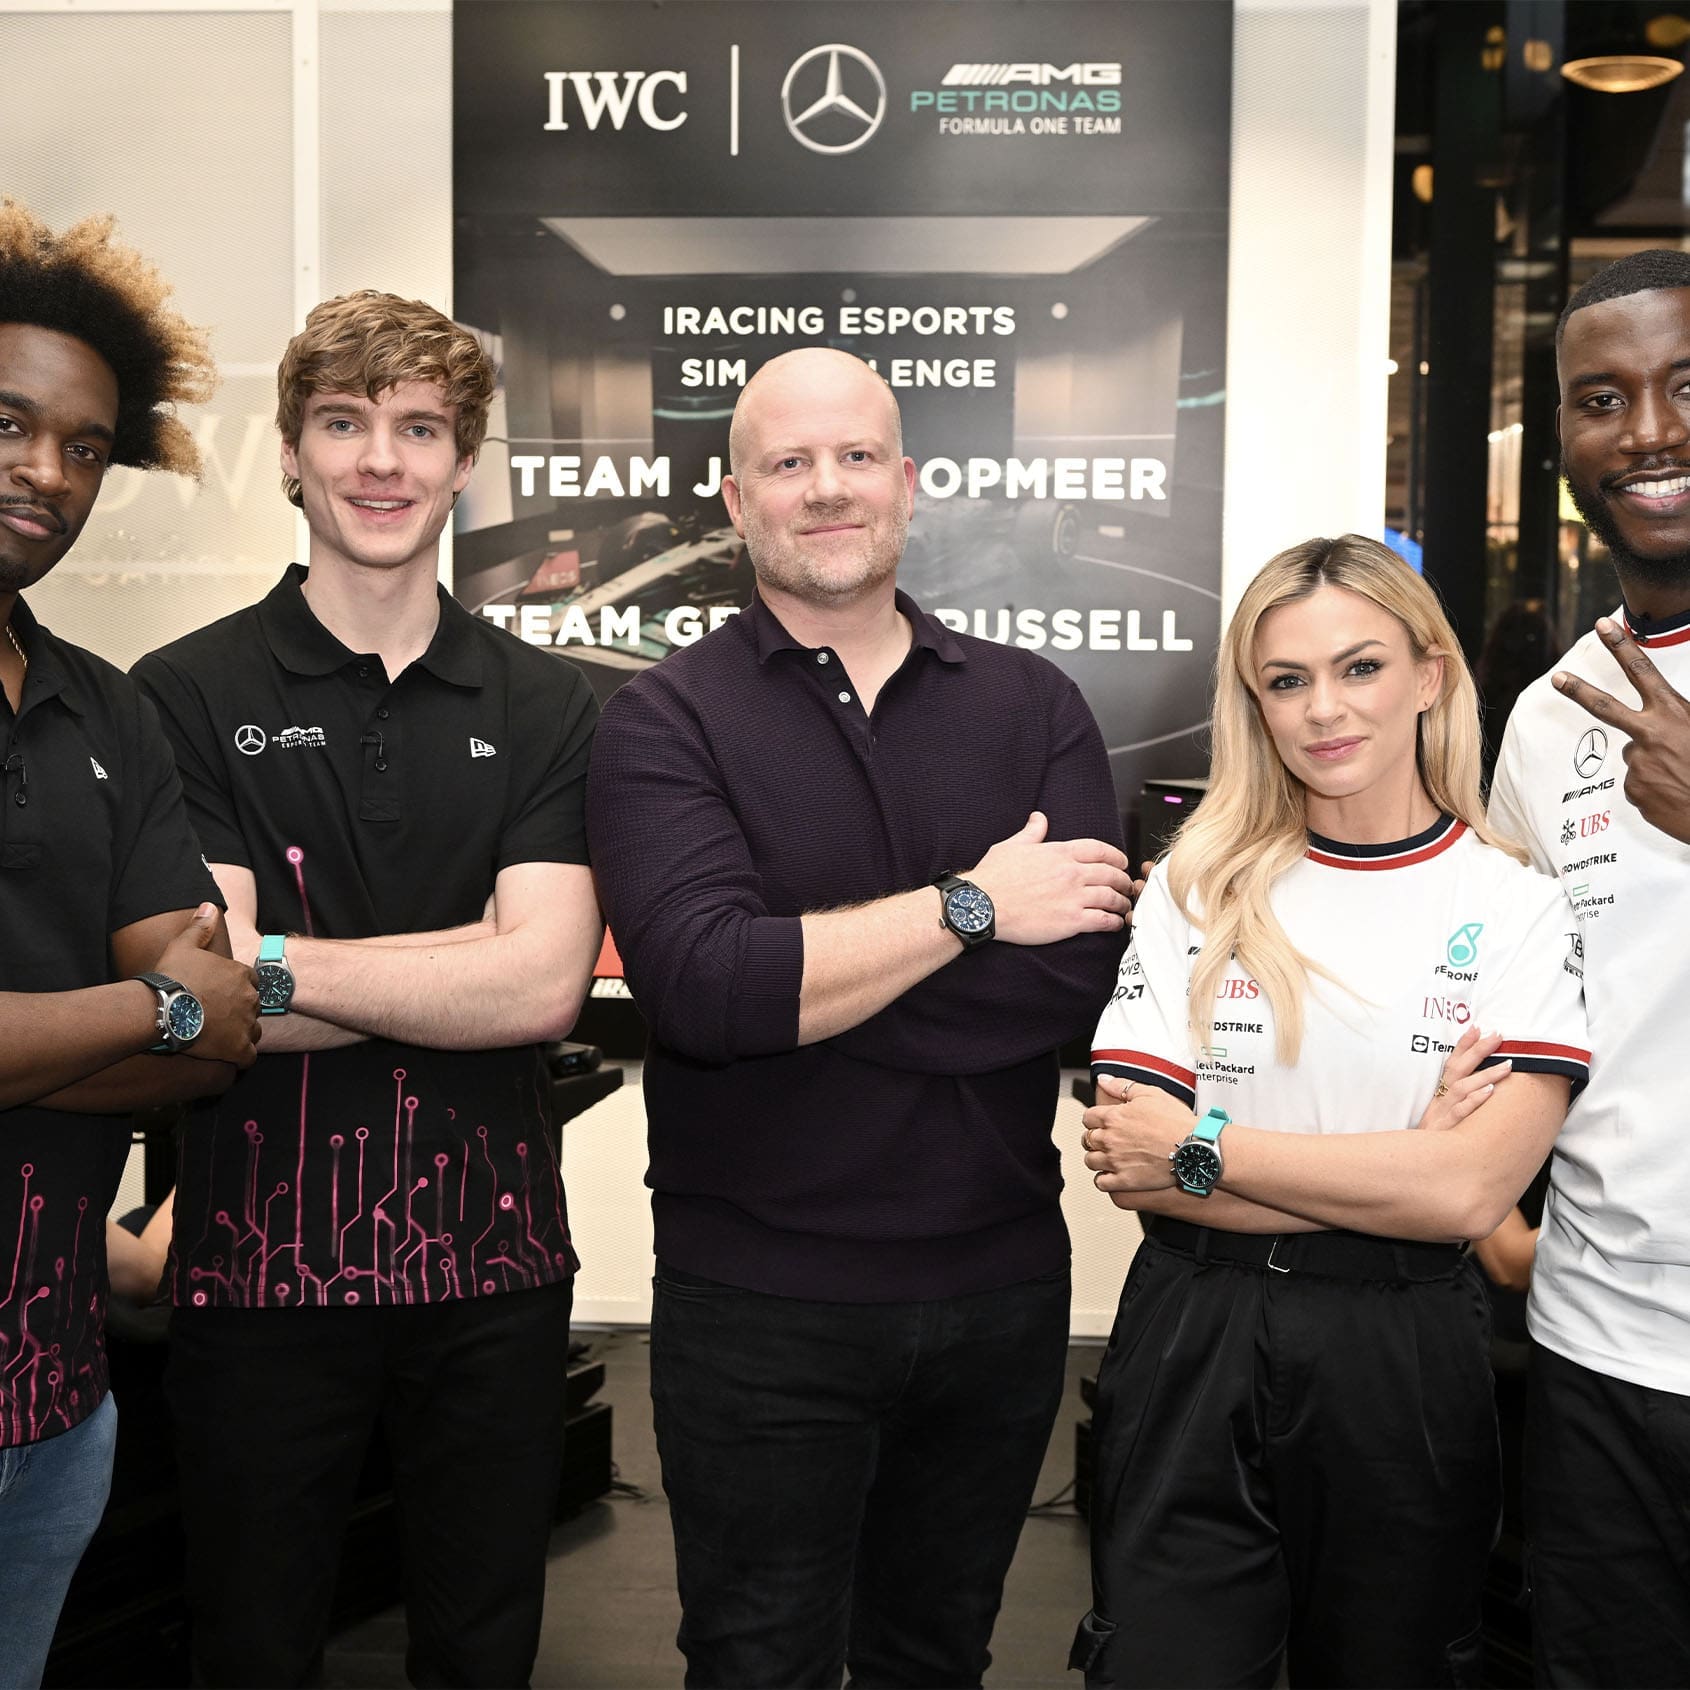 Start your (virtual) engines… The IWC Esports Challenge at Battersea Power Station